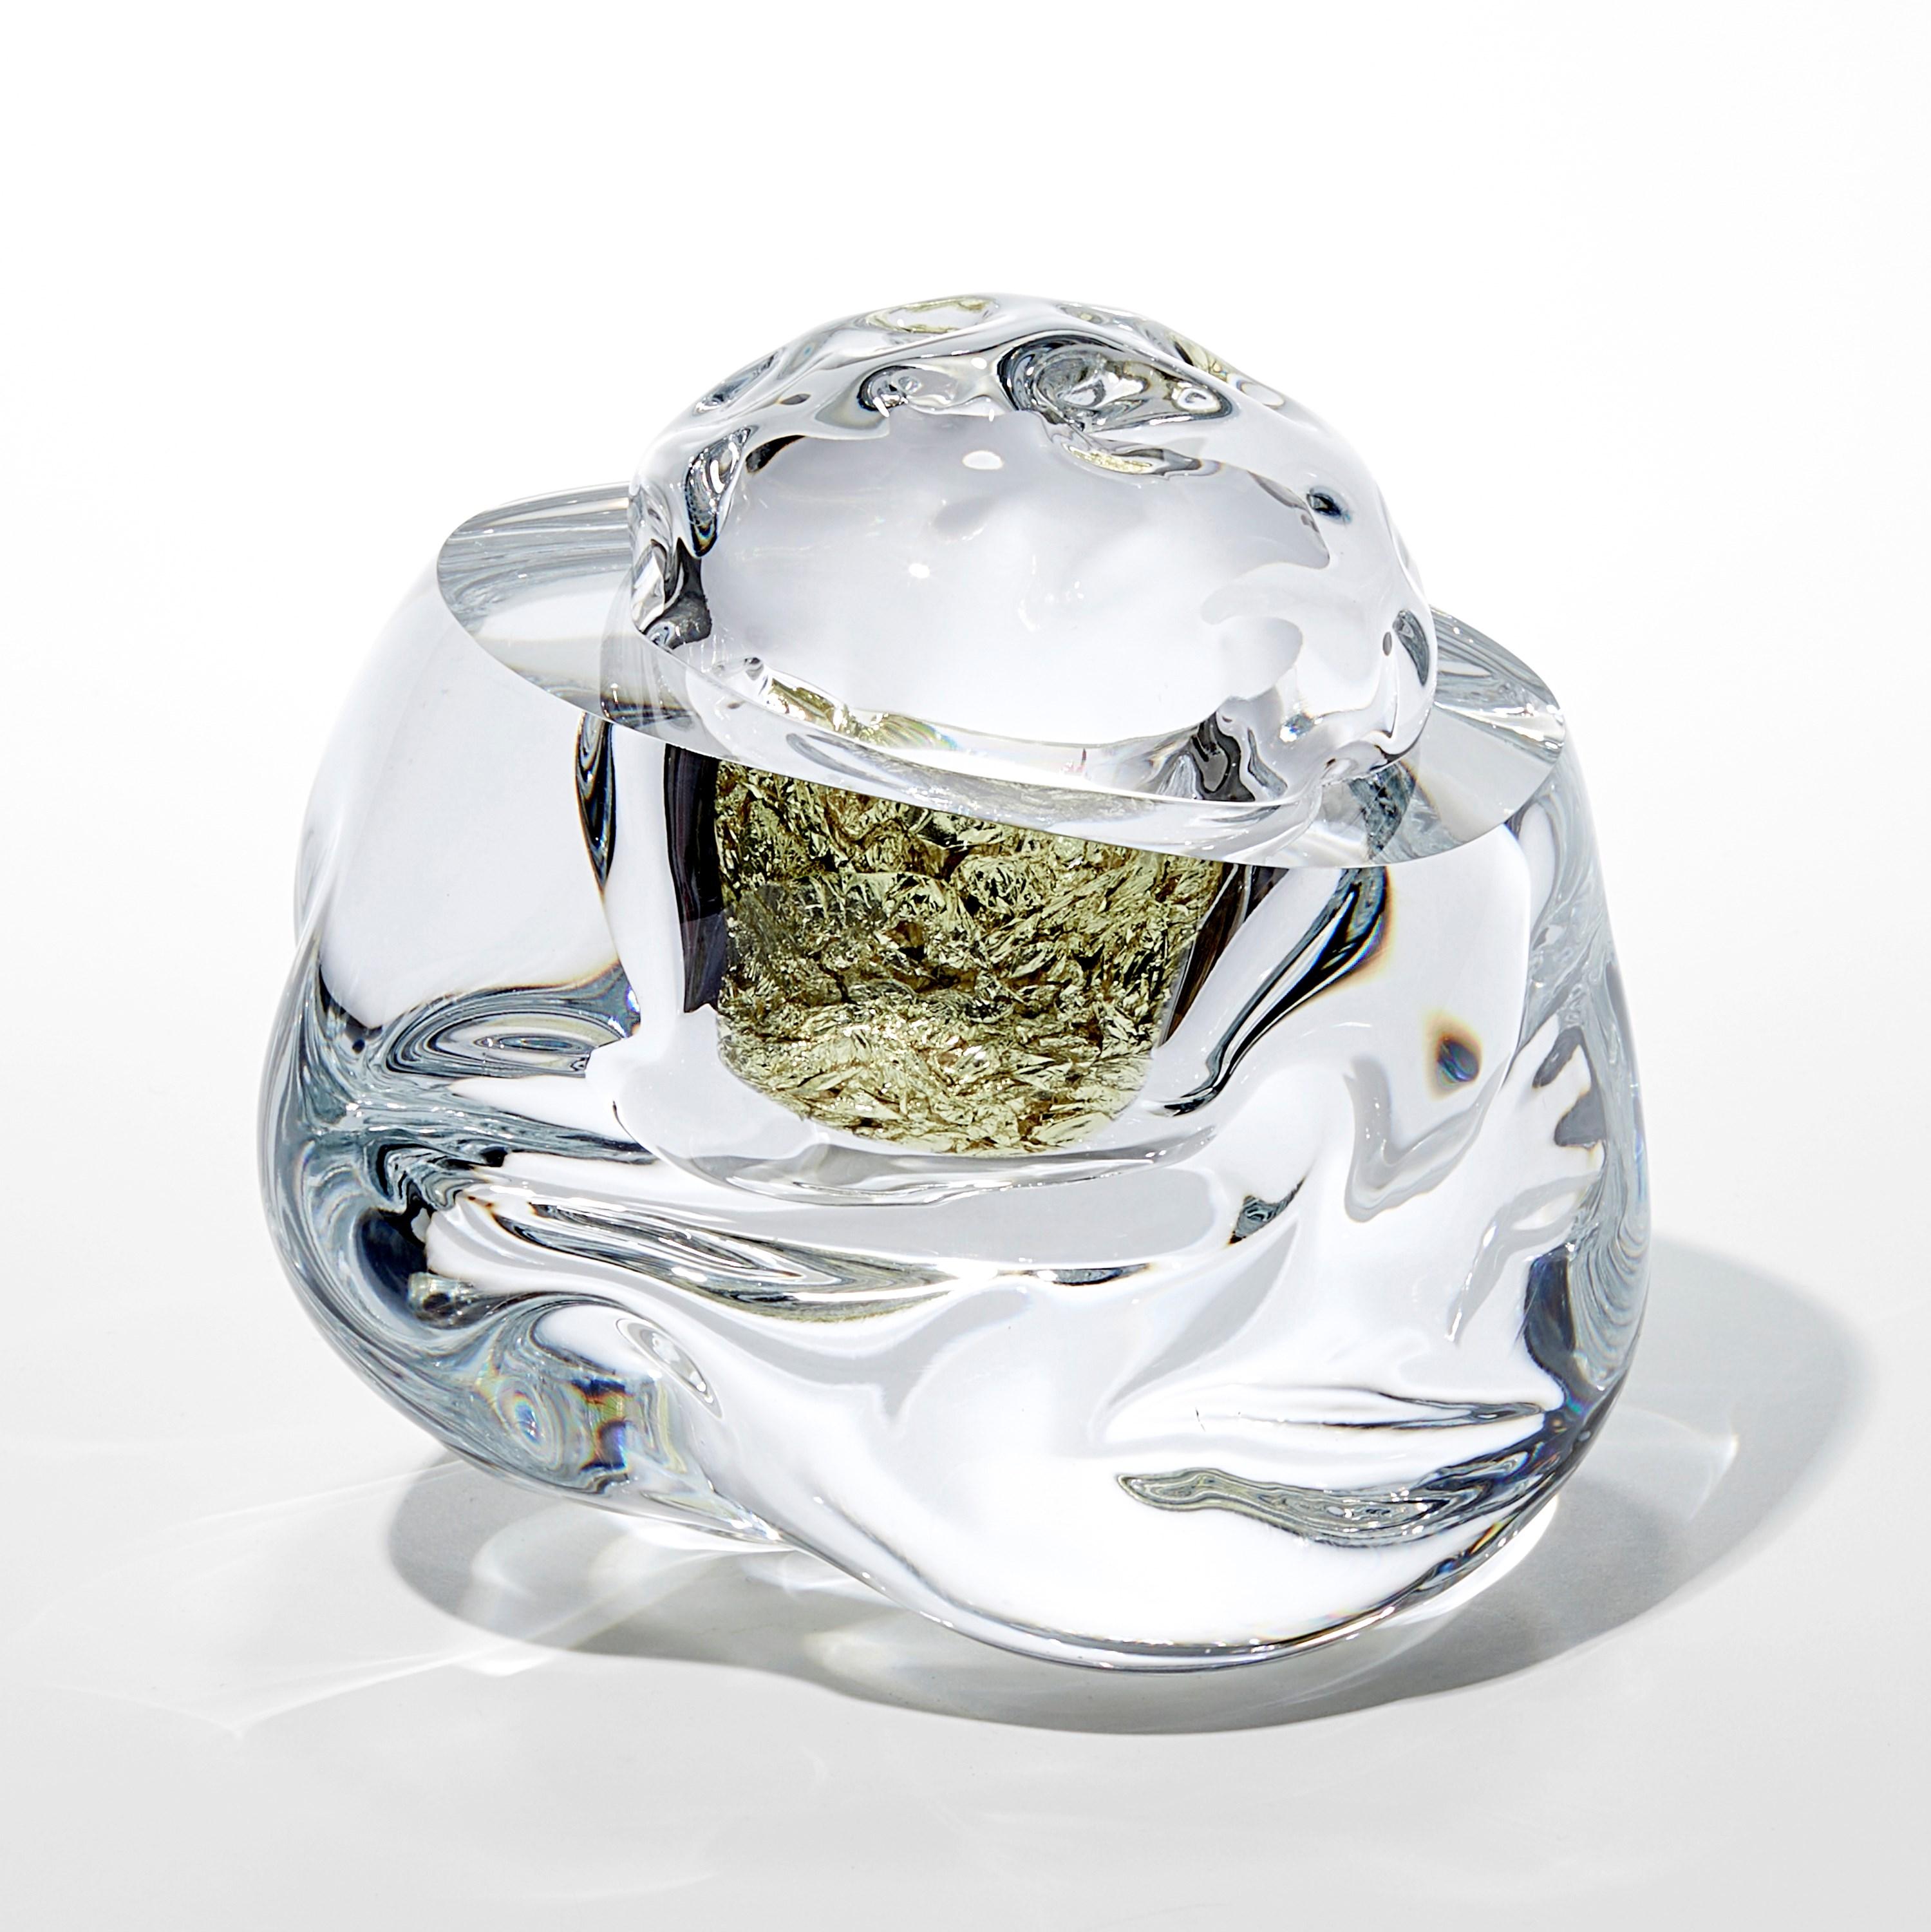 Hand-Crafted Erratic J with 18ct Green Gold, amorphic optical glass artwork by Anthony Scala For Sale